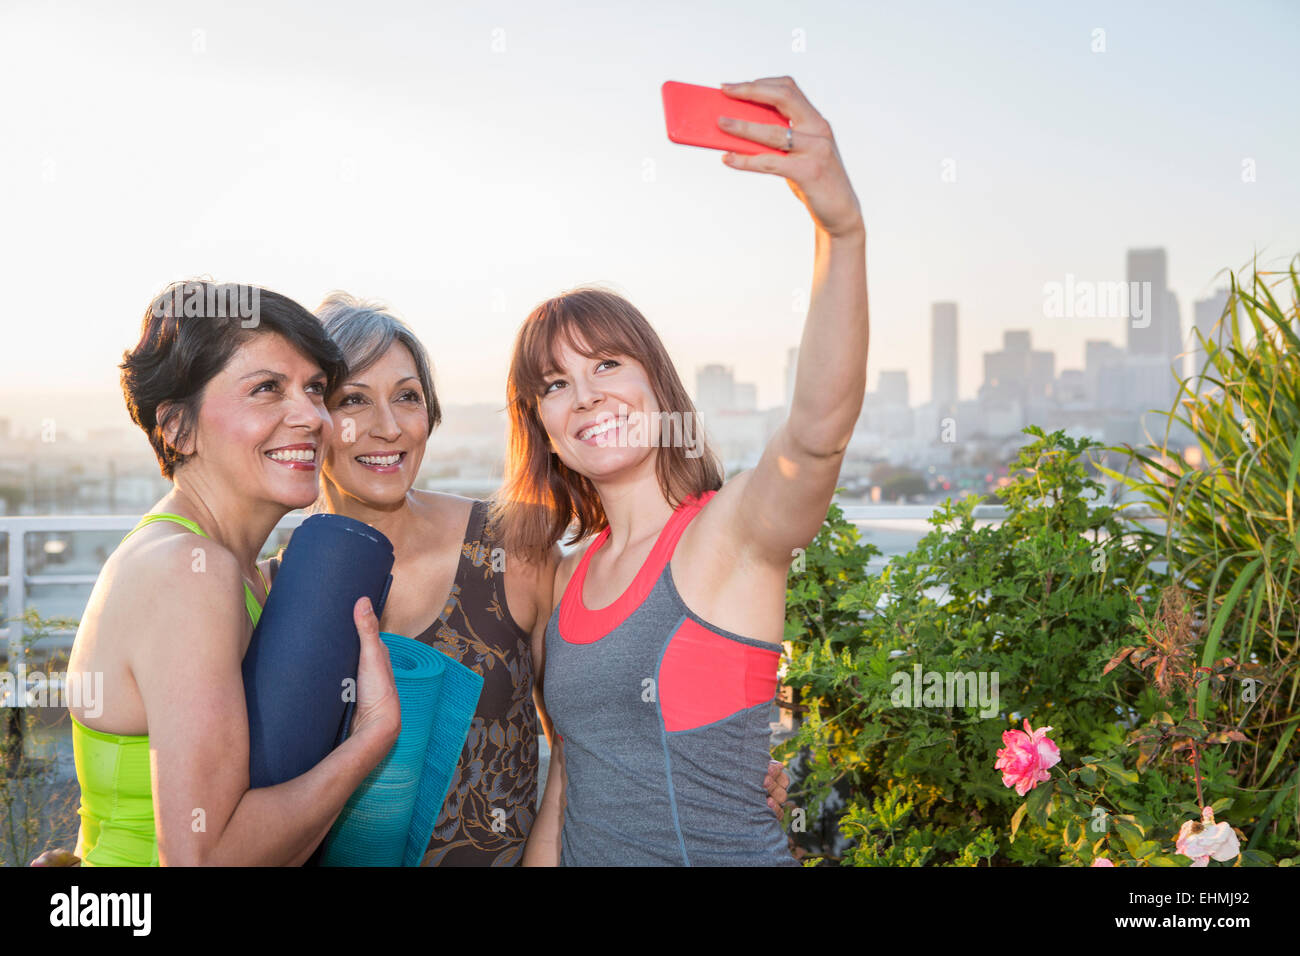 Women taking cell phone selfie on urban rooftop Stock Photo